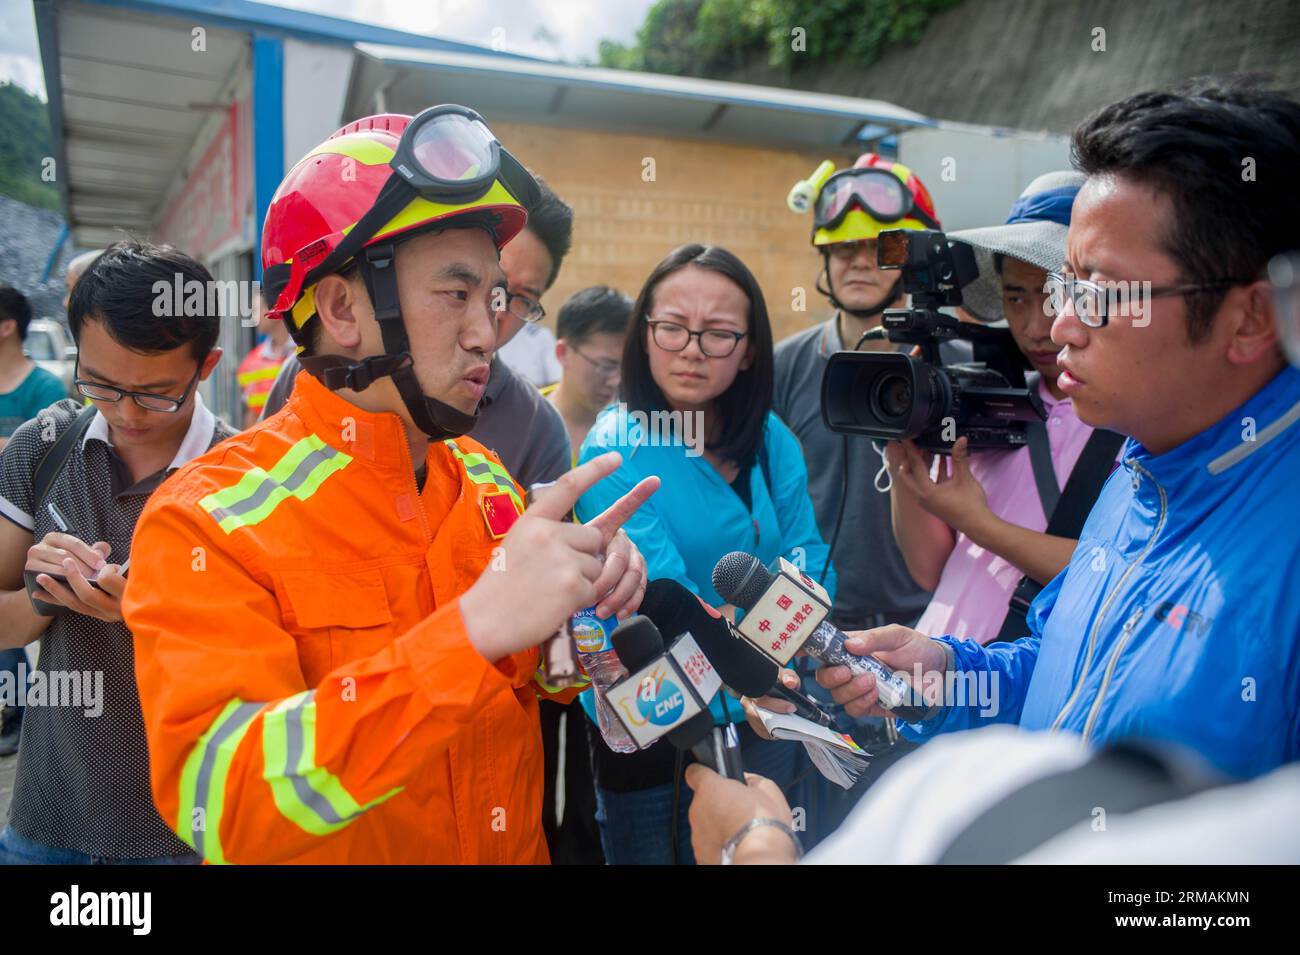 (140715) -- FUNING, July 15, 2014 (Xinhua) -- A rescuer is interviewed by reporters about the rescue plan in Funing County, south China s Yunnan Province, July 15, 2014. Rescue work is continuing in Yunnan after part of a railway tunnel collapsed on Monday afternoon, local authorities said. The tunnel collapsed at around 4 p.m. on Monday, trapping 15 workers, according to the local government. (Xinhua/Hu Chao) (hdt) CHINA-FUNING-TUNNEL COLLAPSE-RESCUE (CN) PUBLICATIONxNOTxINxCHN   Funing July 15 2014 XINHUA a Rescuer IS interviewed by Reporters About The Rescue Plan in Funing County South Chin Stock Photo